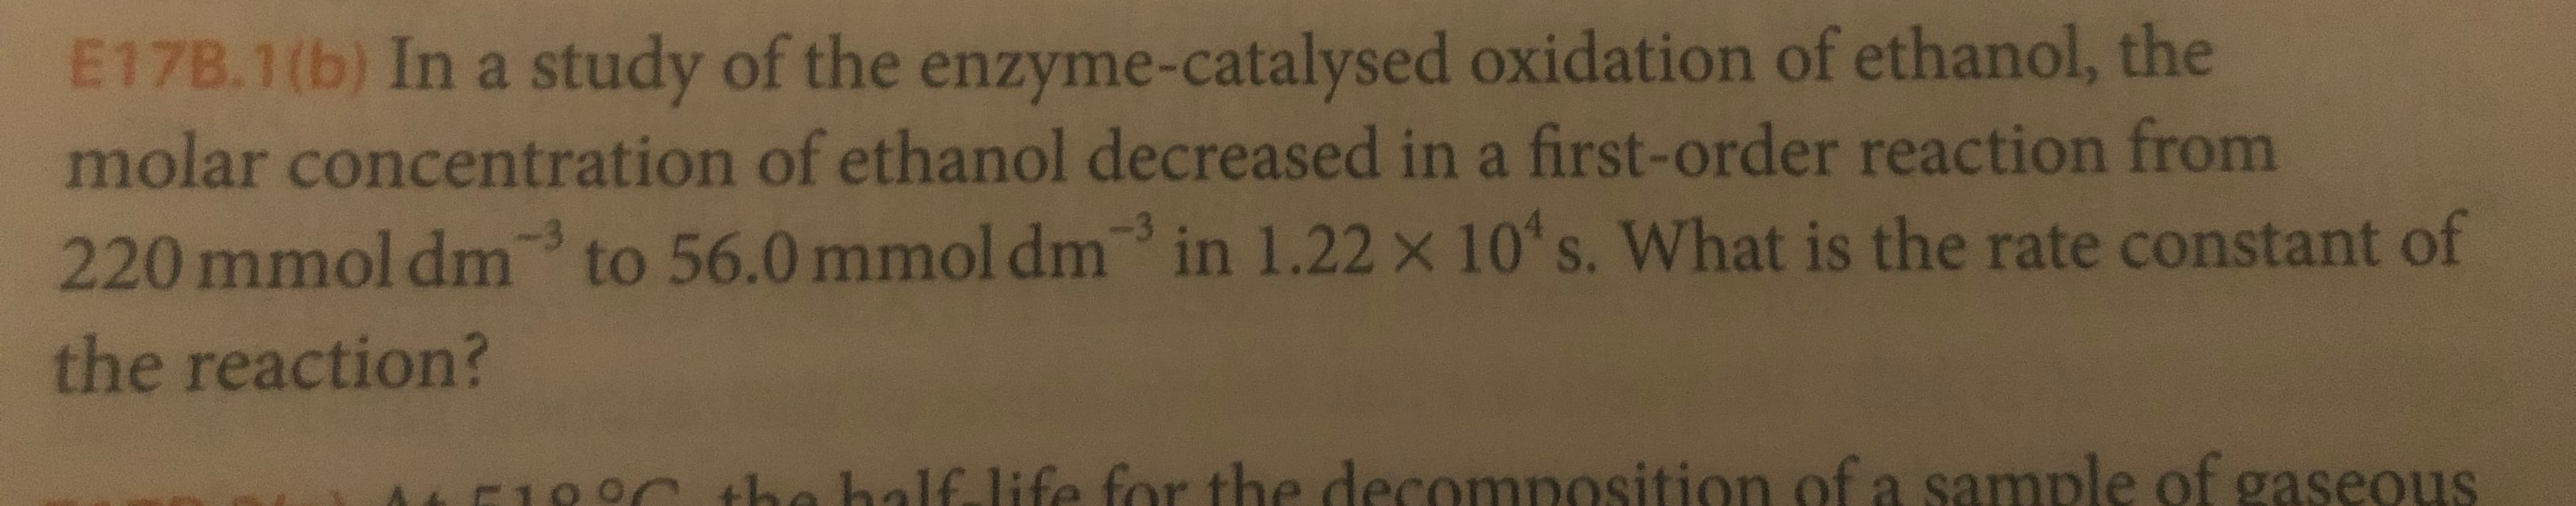 E17B.1(b) In a study of the enzyme-catalysed oxidation of ethanol, the
molar concentration of ethanol decreased in a first-order reaction from
in 1.22 x 10 s. What is the rate constant of
to 56.0 mmol dm
220 mmol dm
the reaction?
ha balf life for the decomposition of a sample of gaseous
-10
